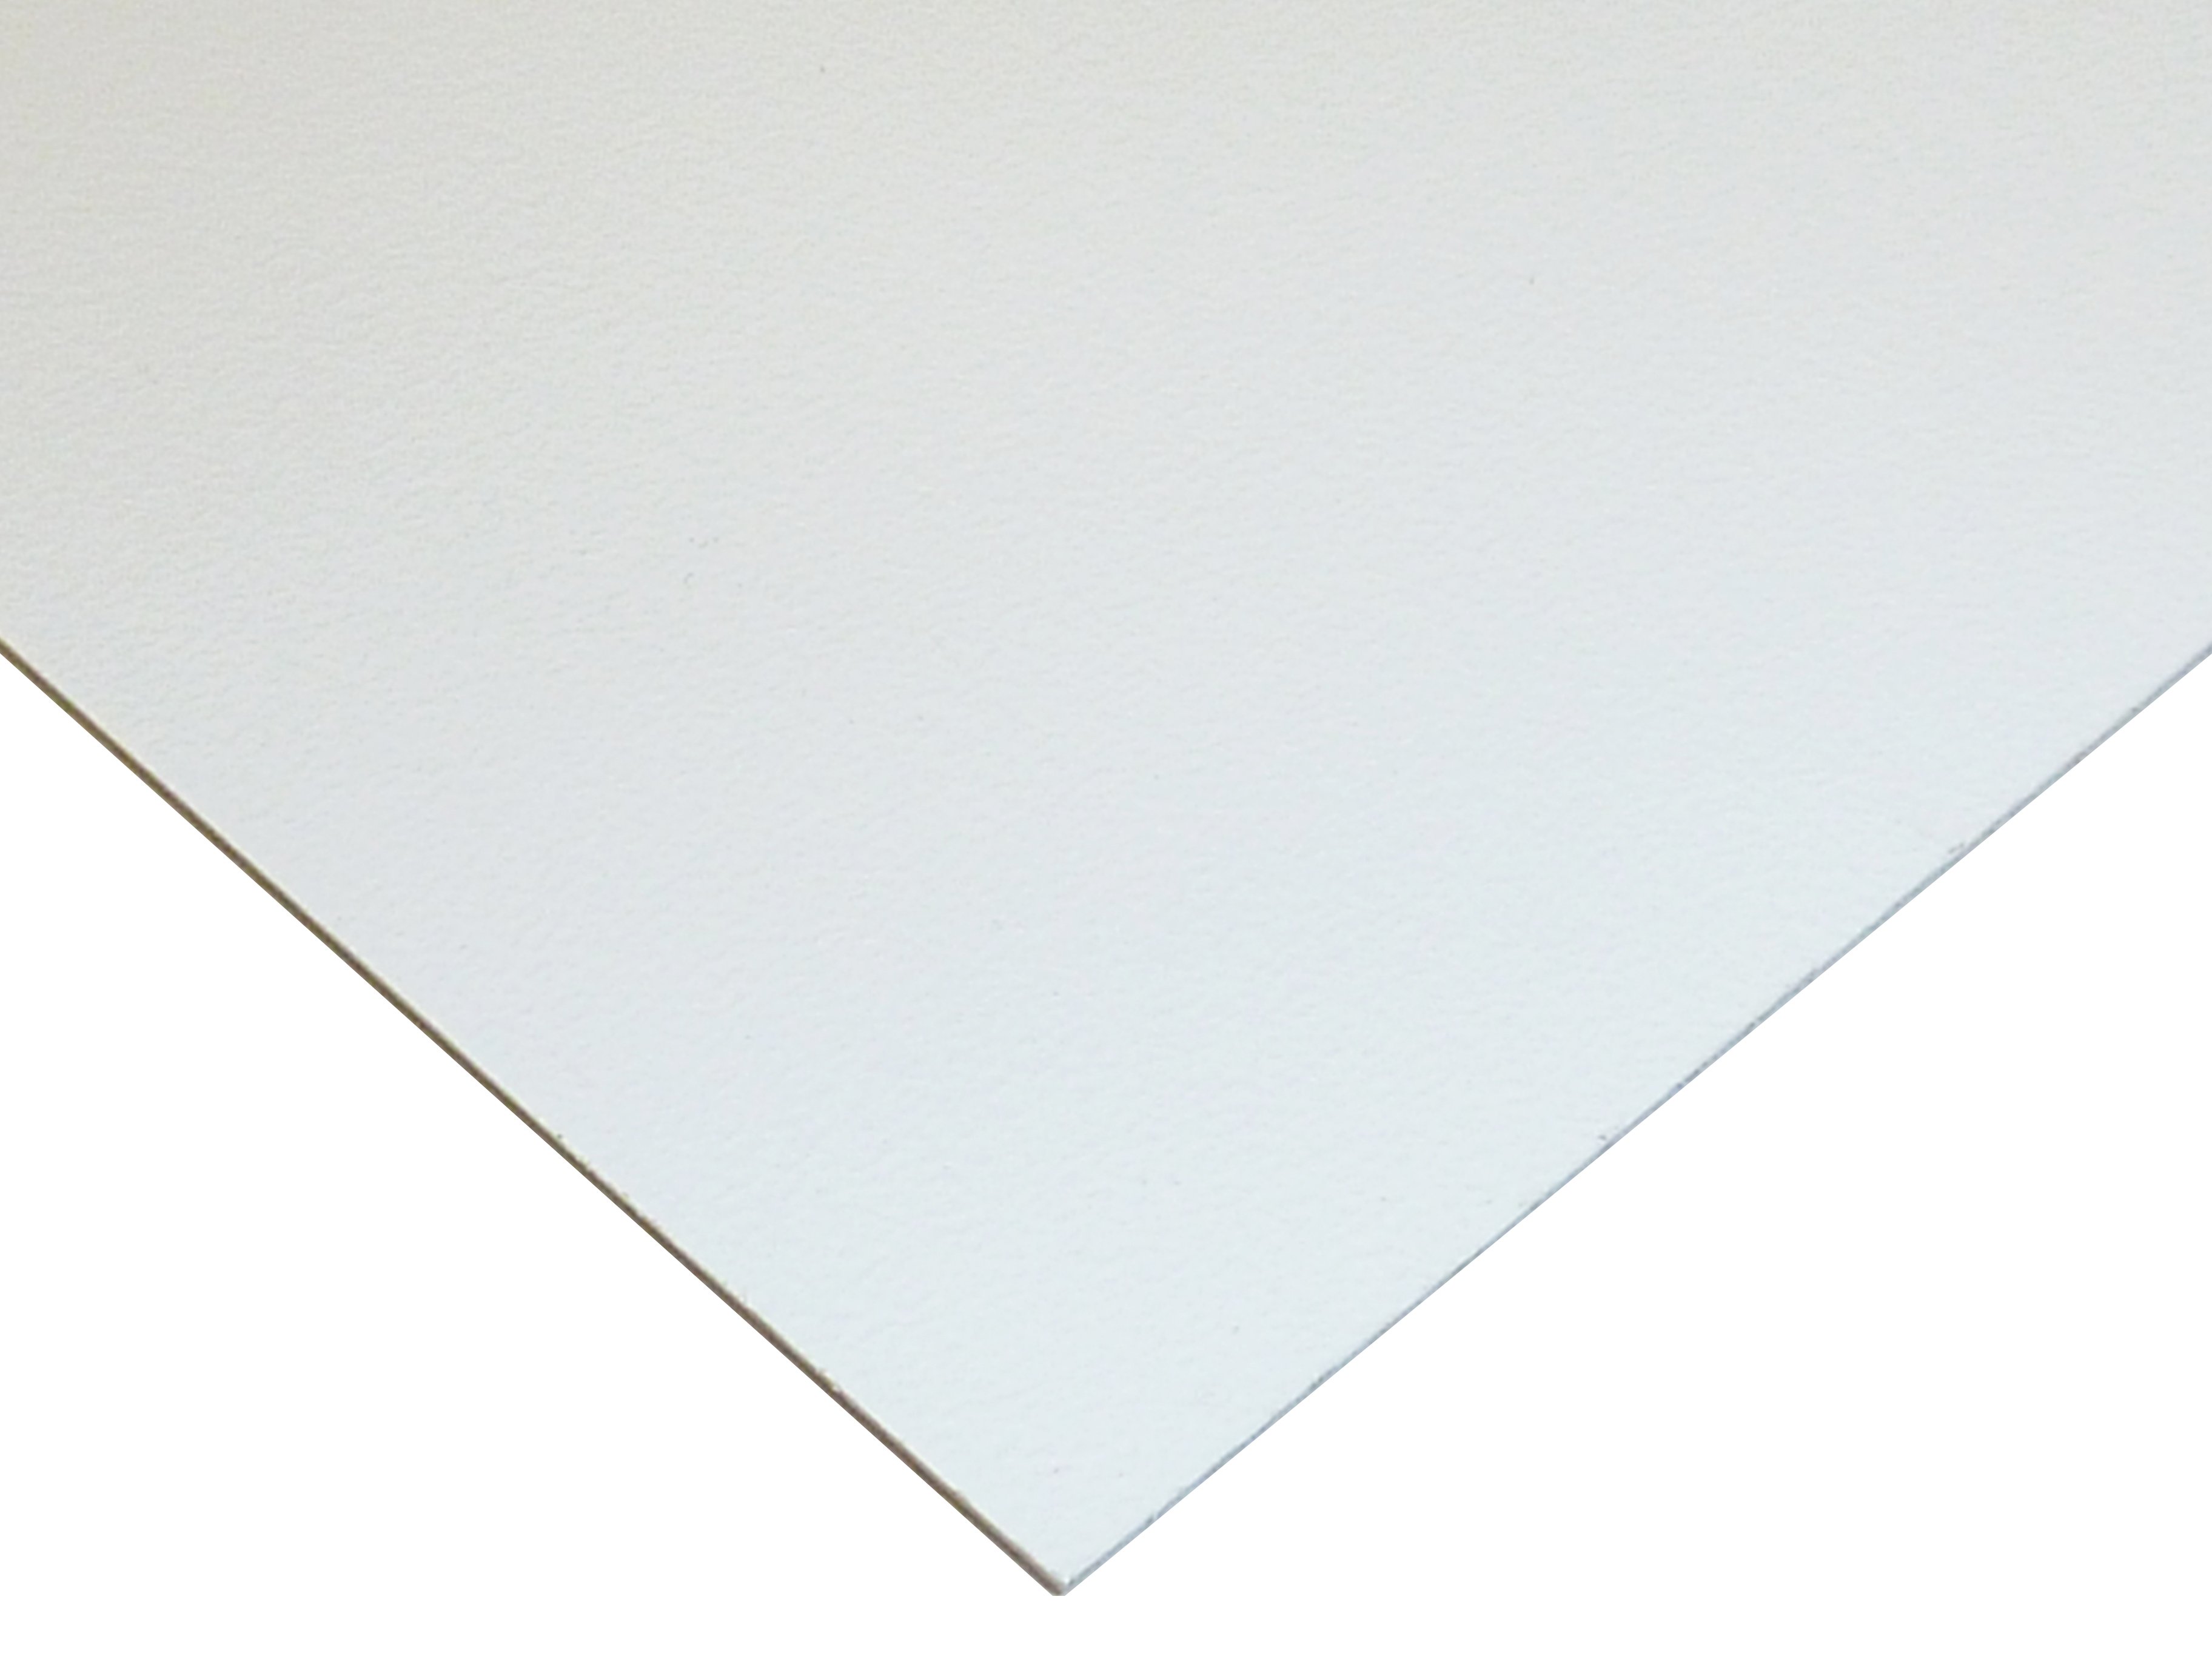 12 Width P3 Velour Matte Meets UL 94V0 and 945V Specifications Kydex T Sheet 0.060 Thickness Polar White 24 Length 